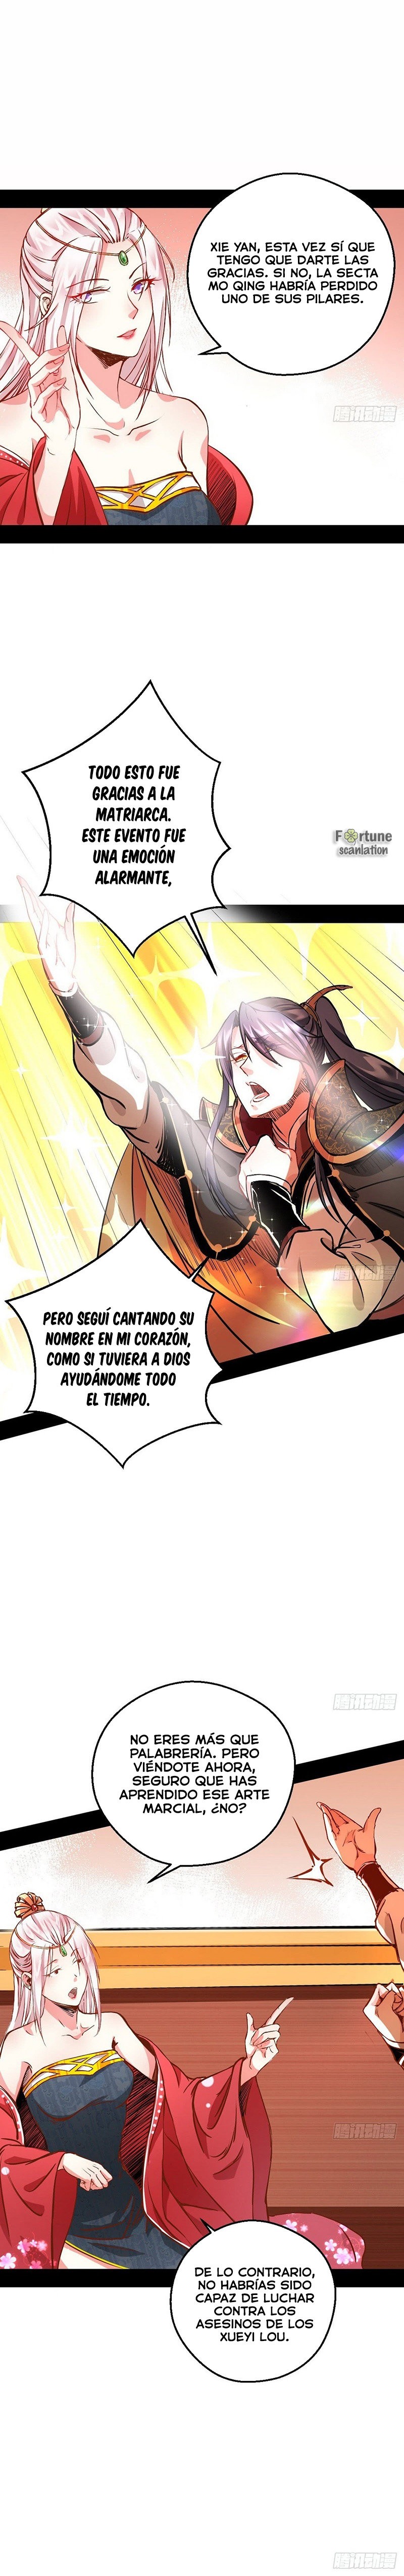 Manga Soy un dios maligno Chapter 40 image number 10